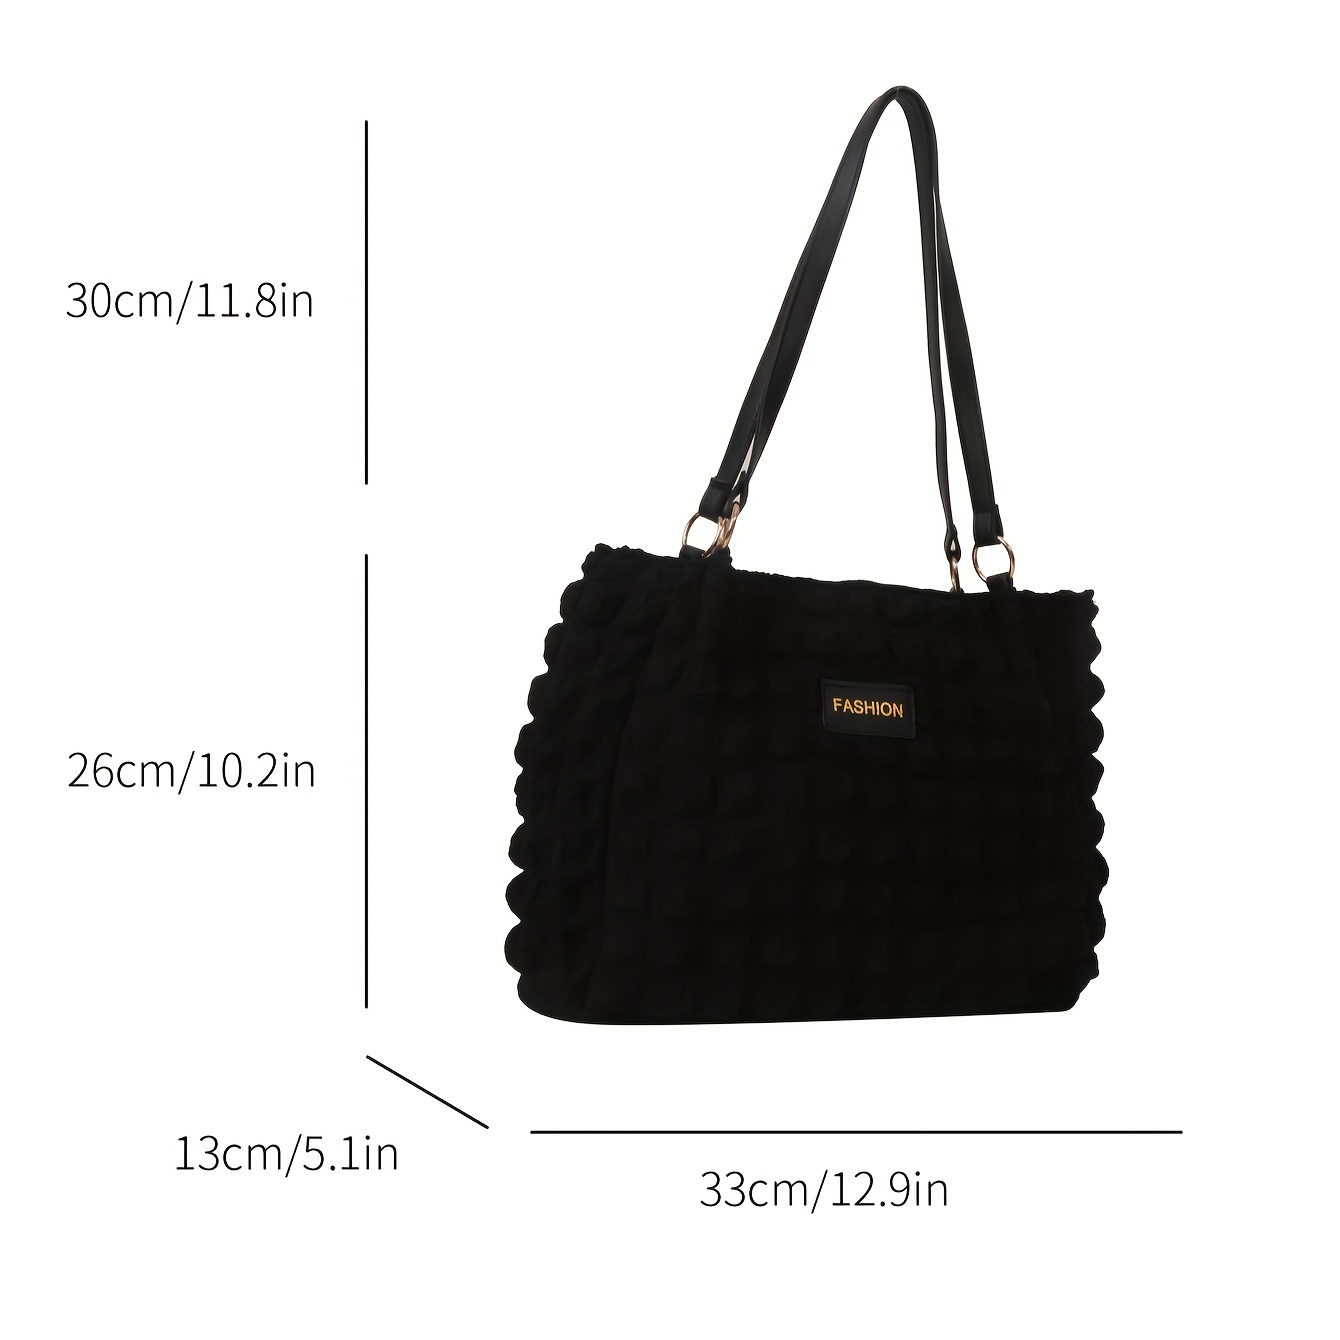 Luxury tote bag in pleated leather for women